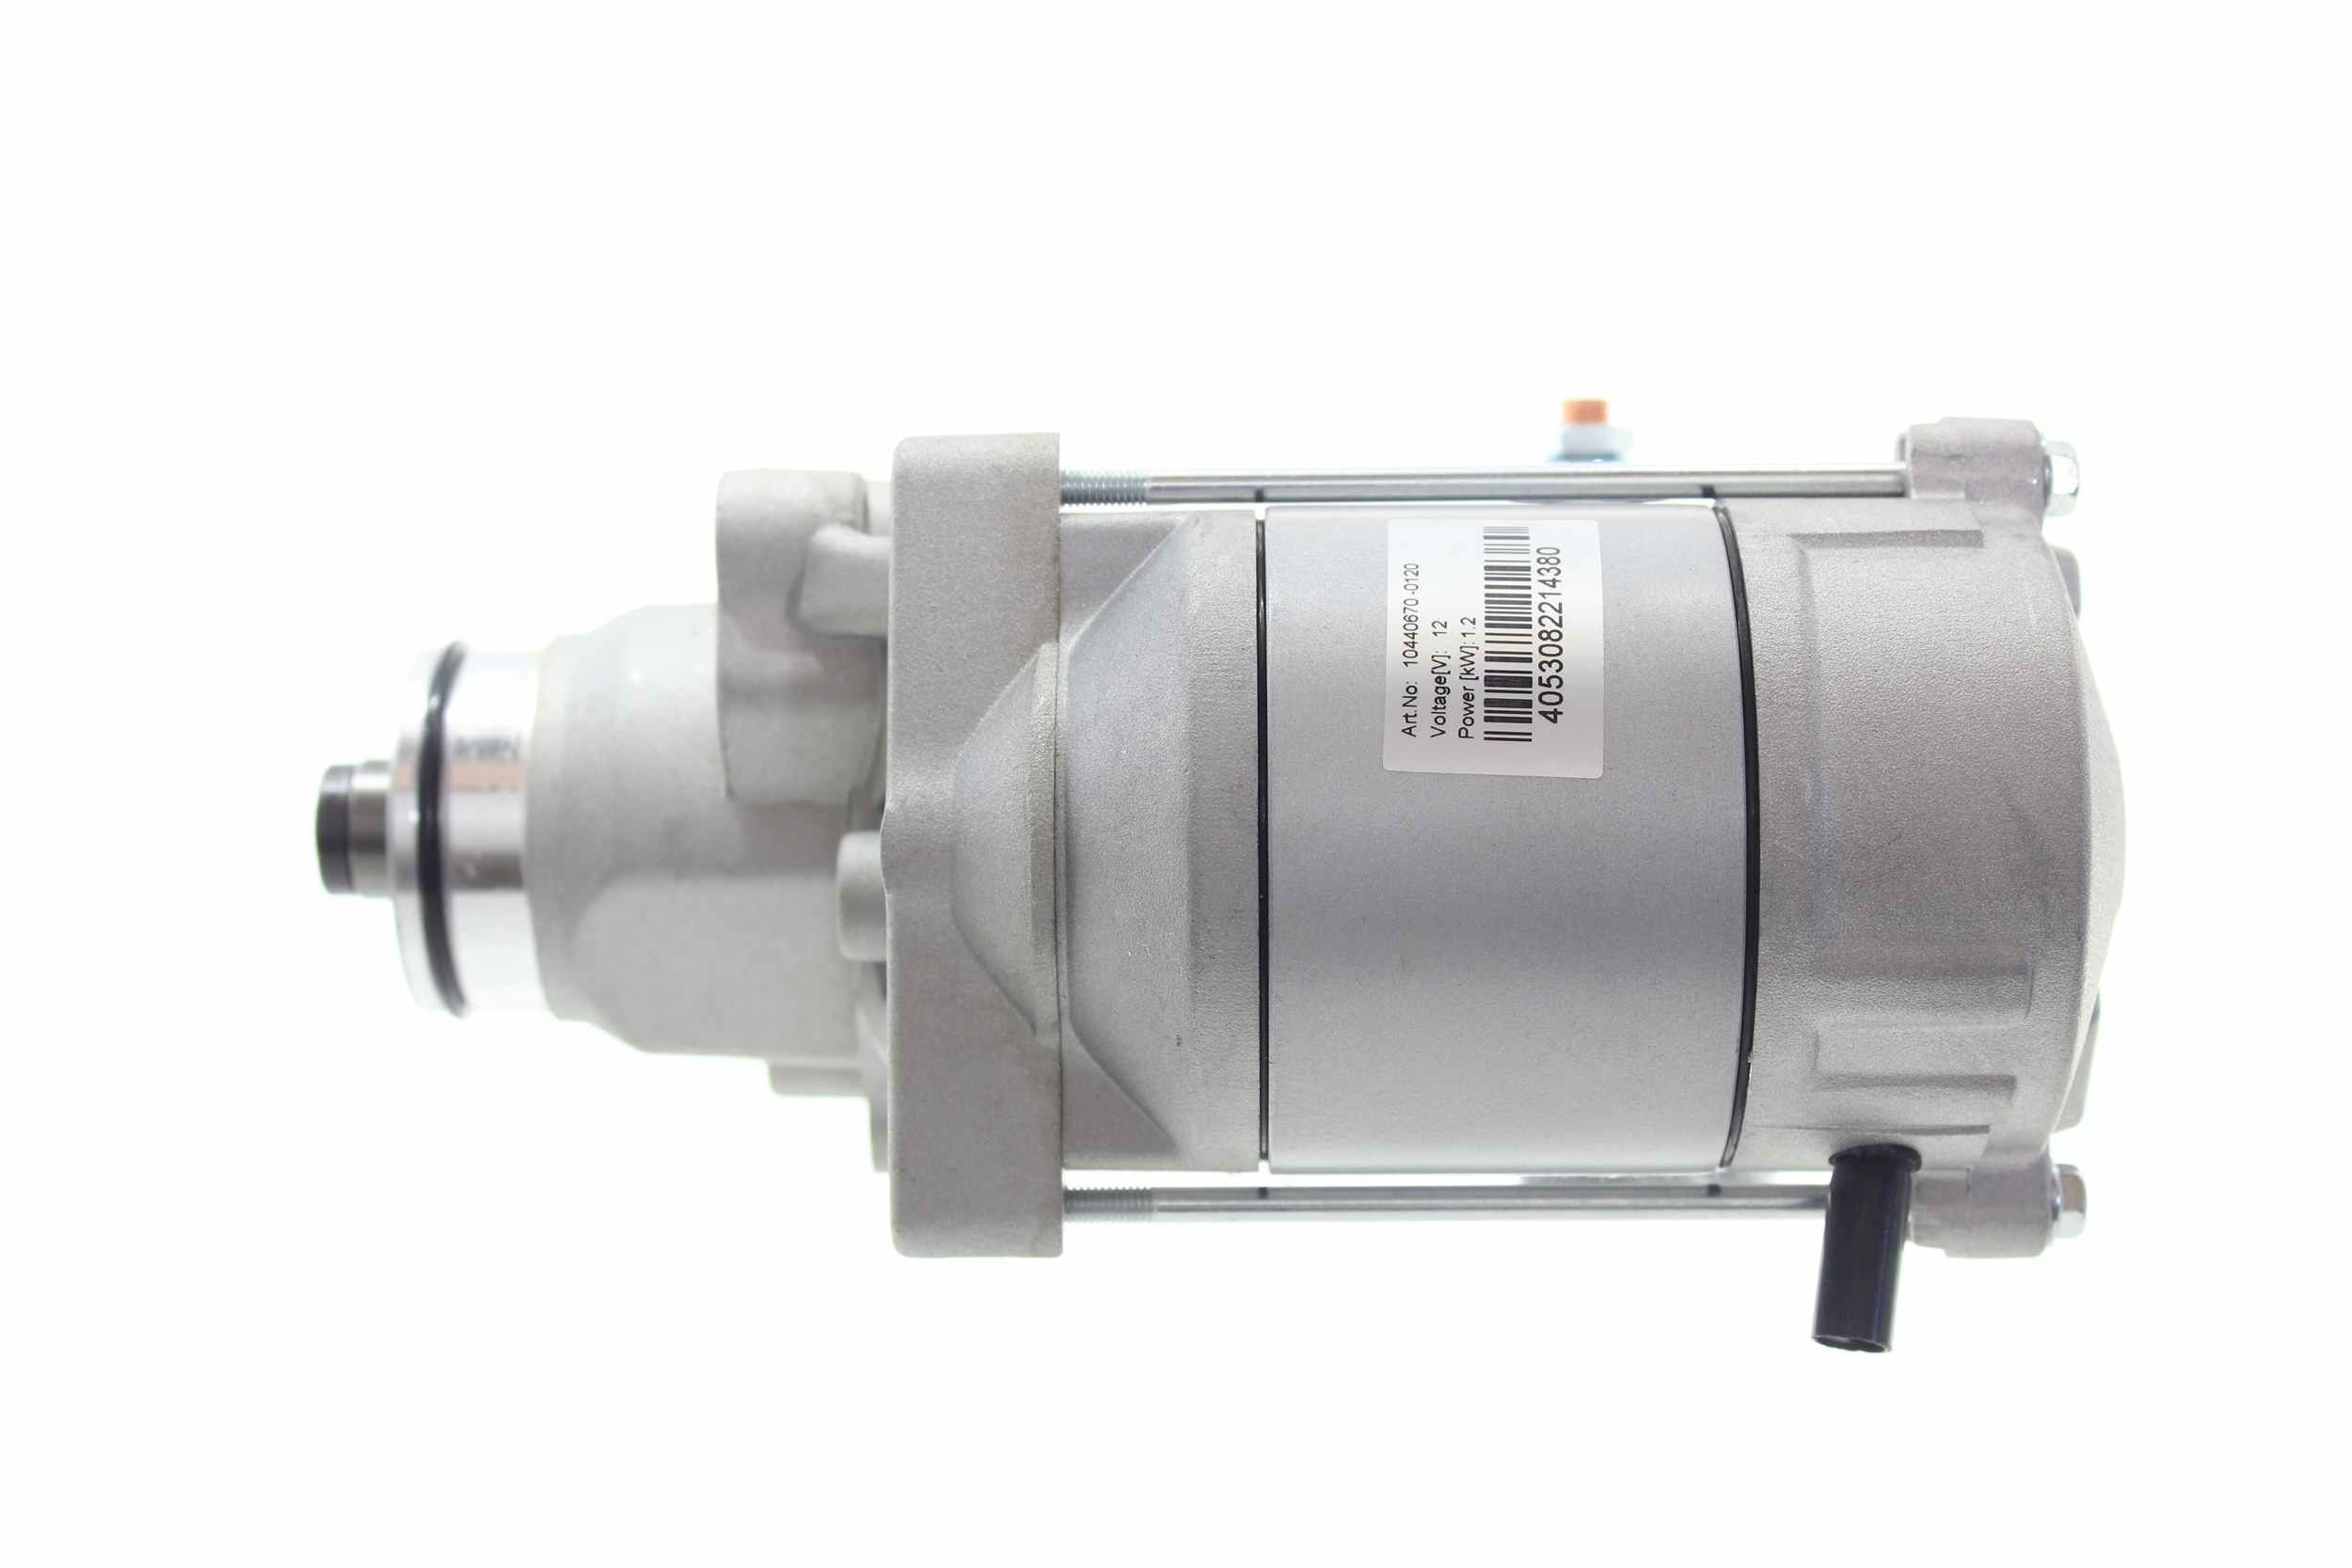 10440670 Engine starter motor ALANKO 17629 review and test